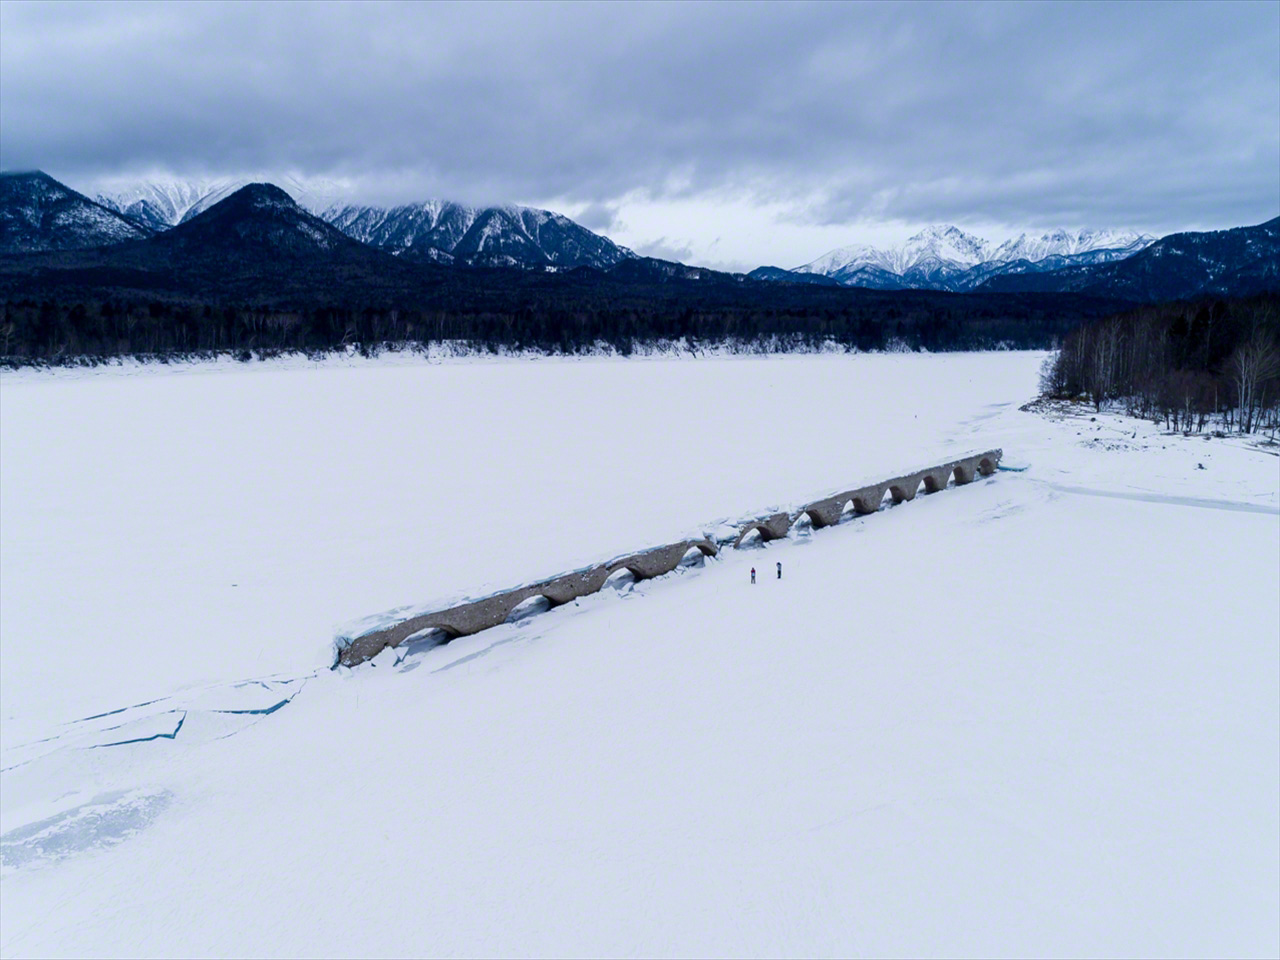 The waters of Lake Nukabira start to drop in January, and the bridge becomes visible on the frozen surface. The mountains of the Daisetsuzan National Park are seen in the background.